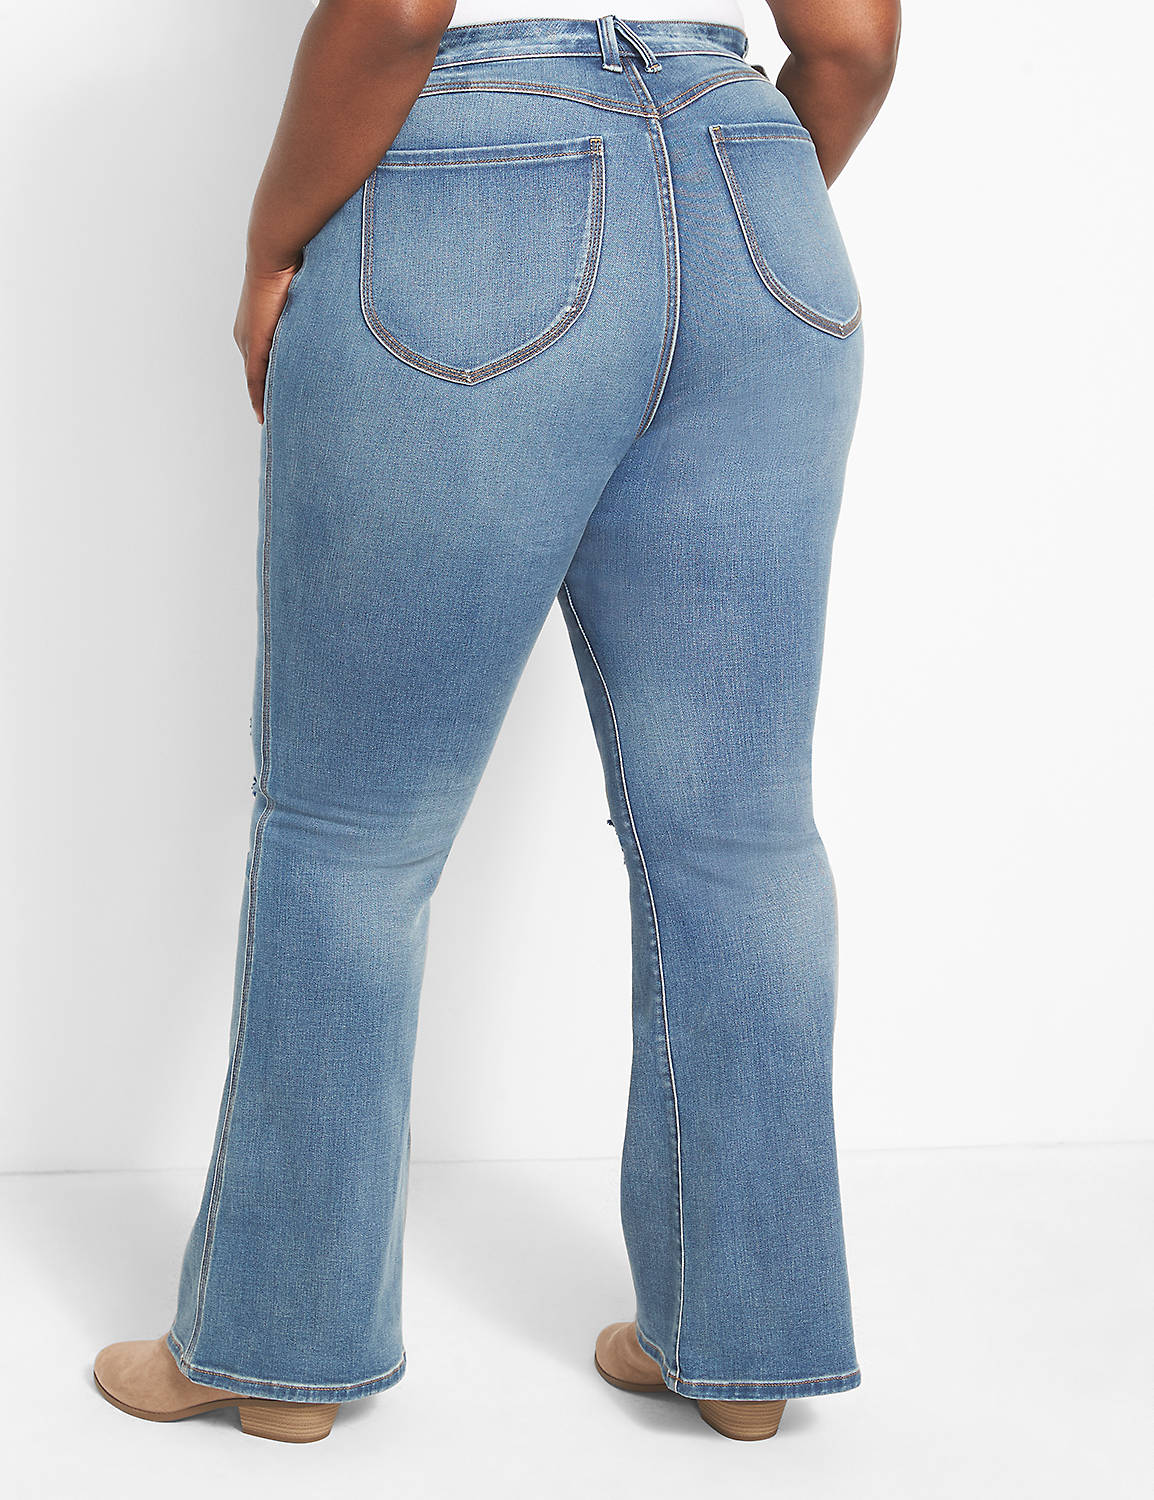 CURVY FIT HIGH RISE FLARE JEAN - BO Product Image 2